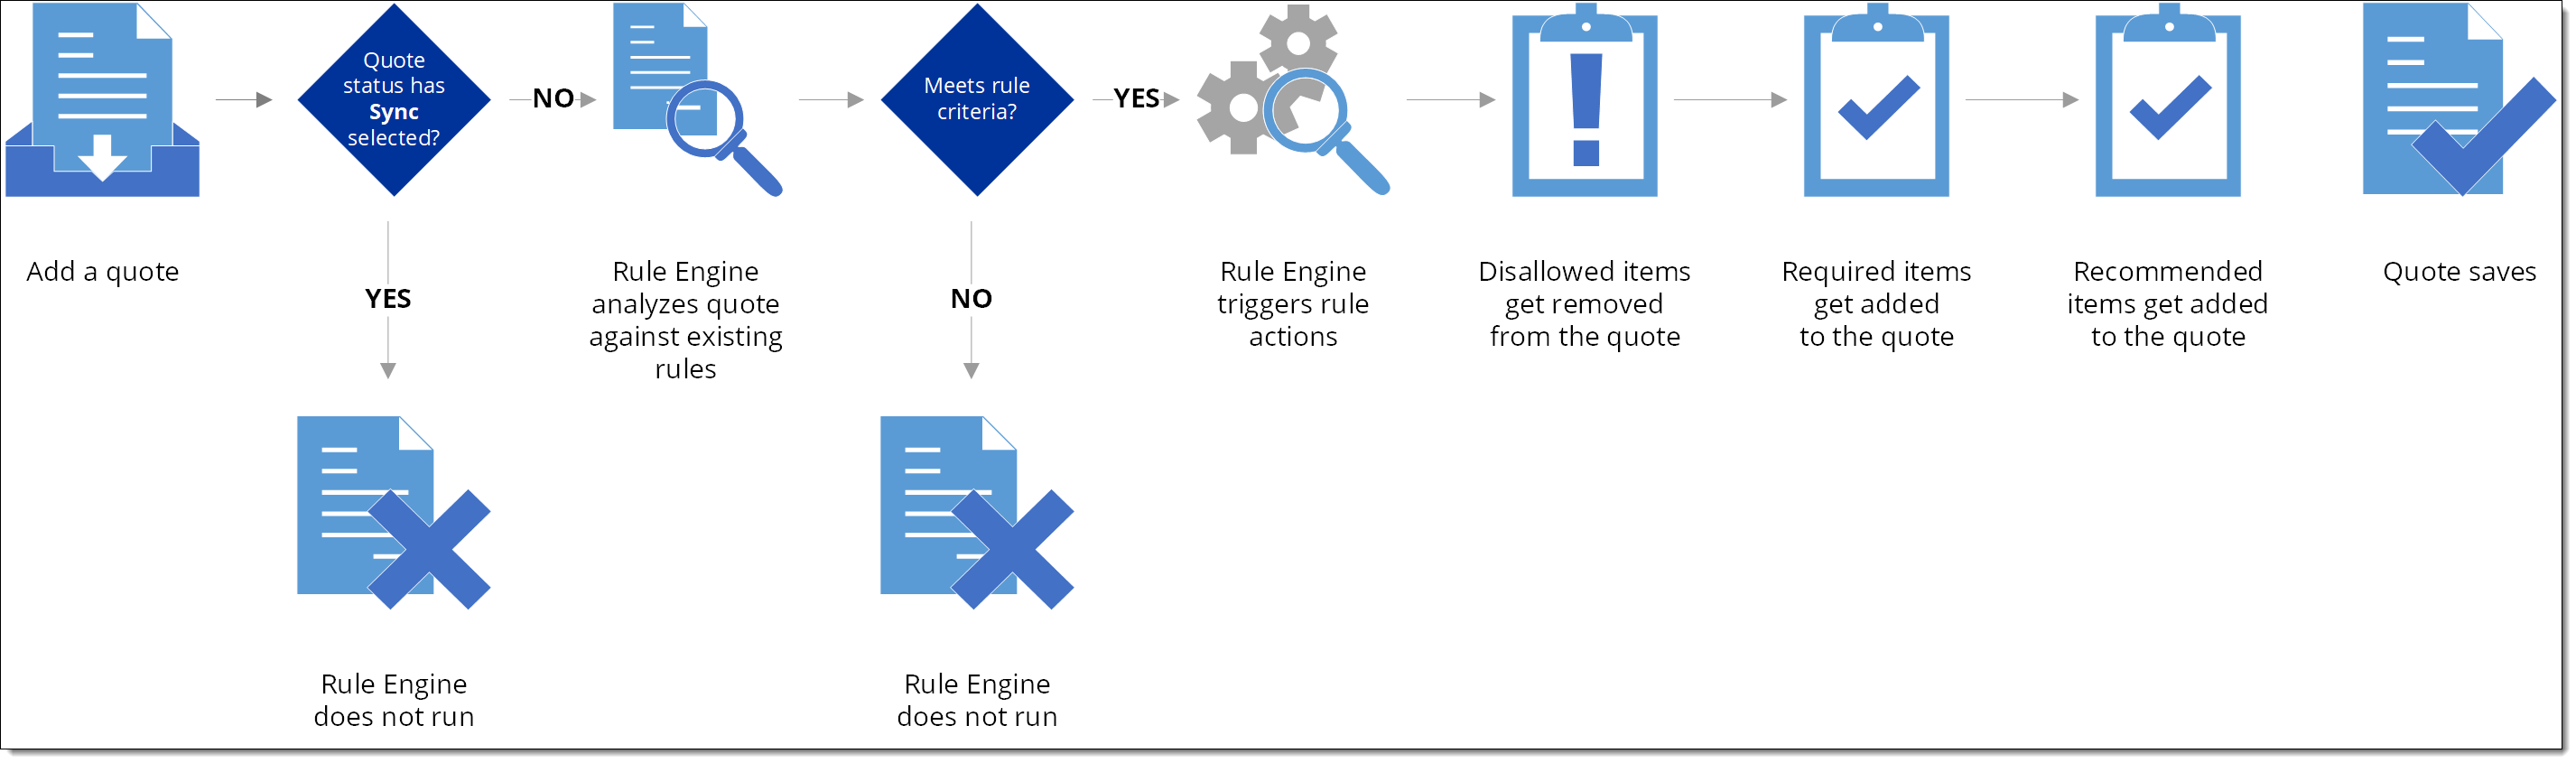 Graphic showing the rule engine process when adding a quote in FieldFX Back Office